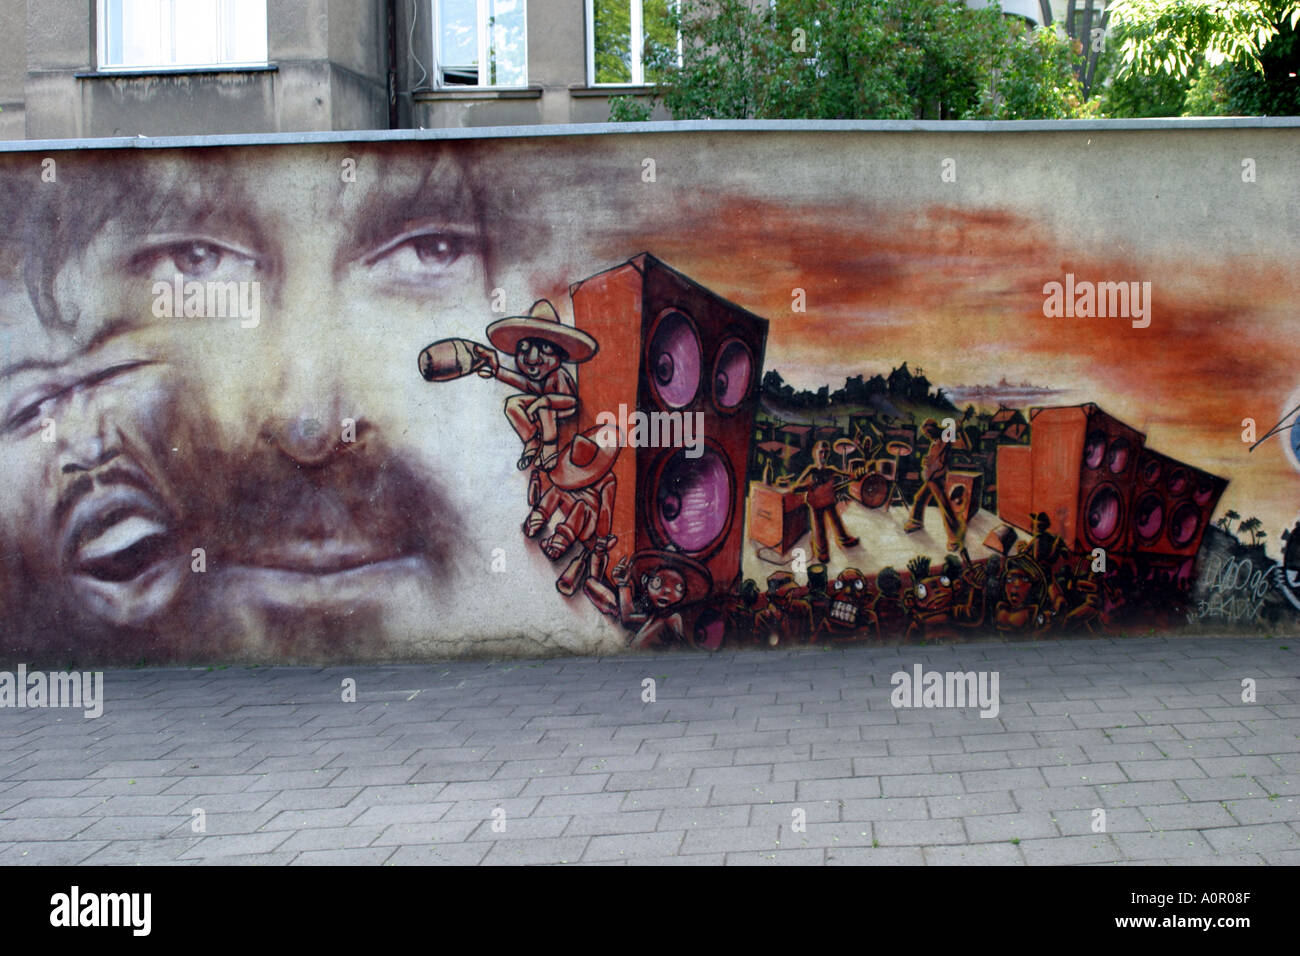 Bust and mural of Frank Zappa in Vilnius Lithuania Stock Photo